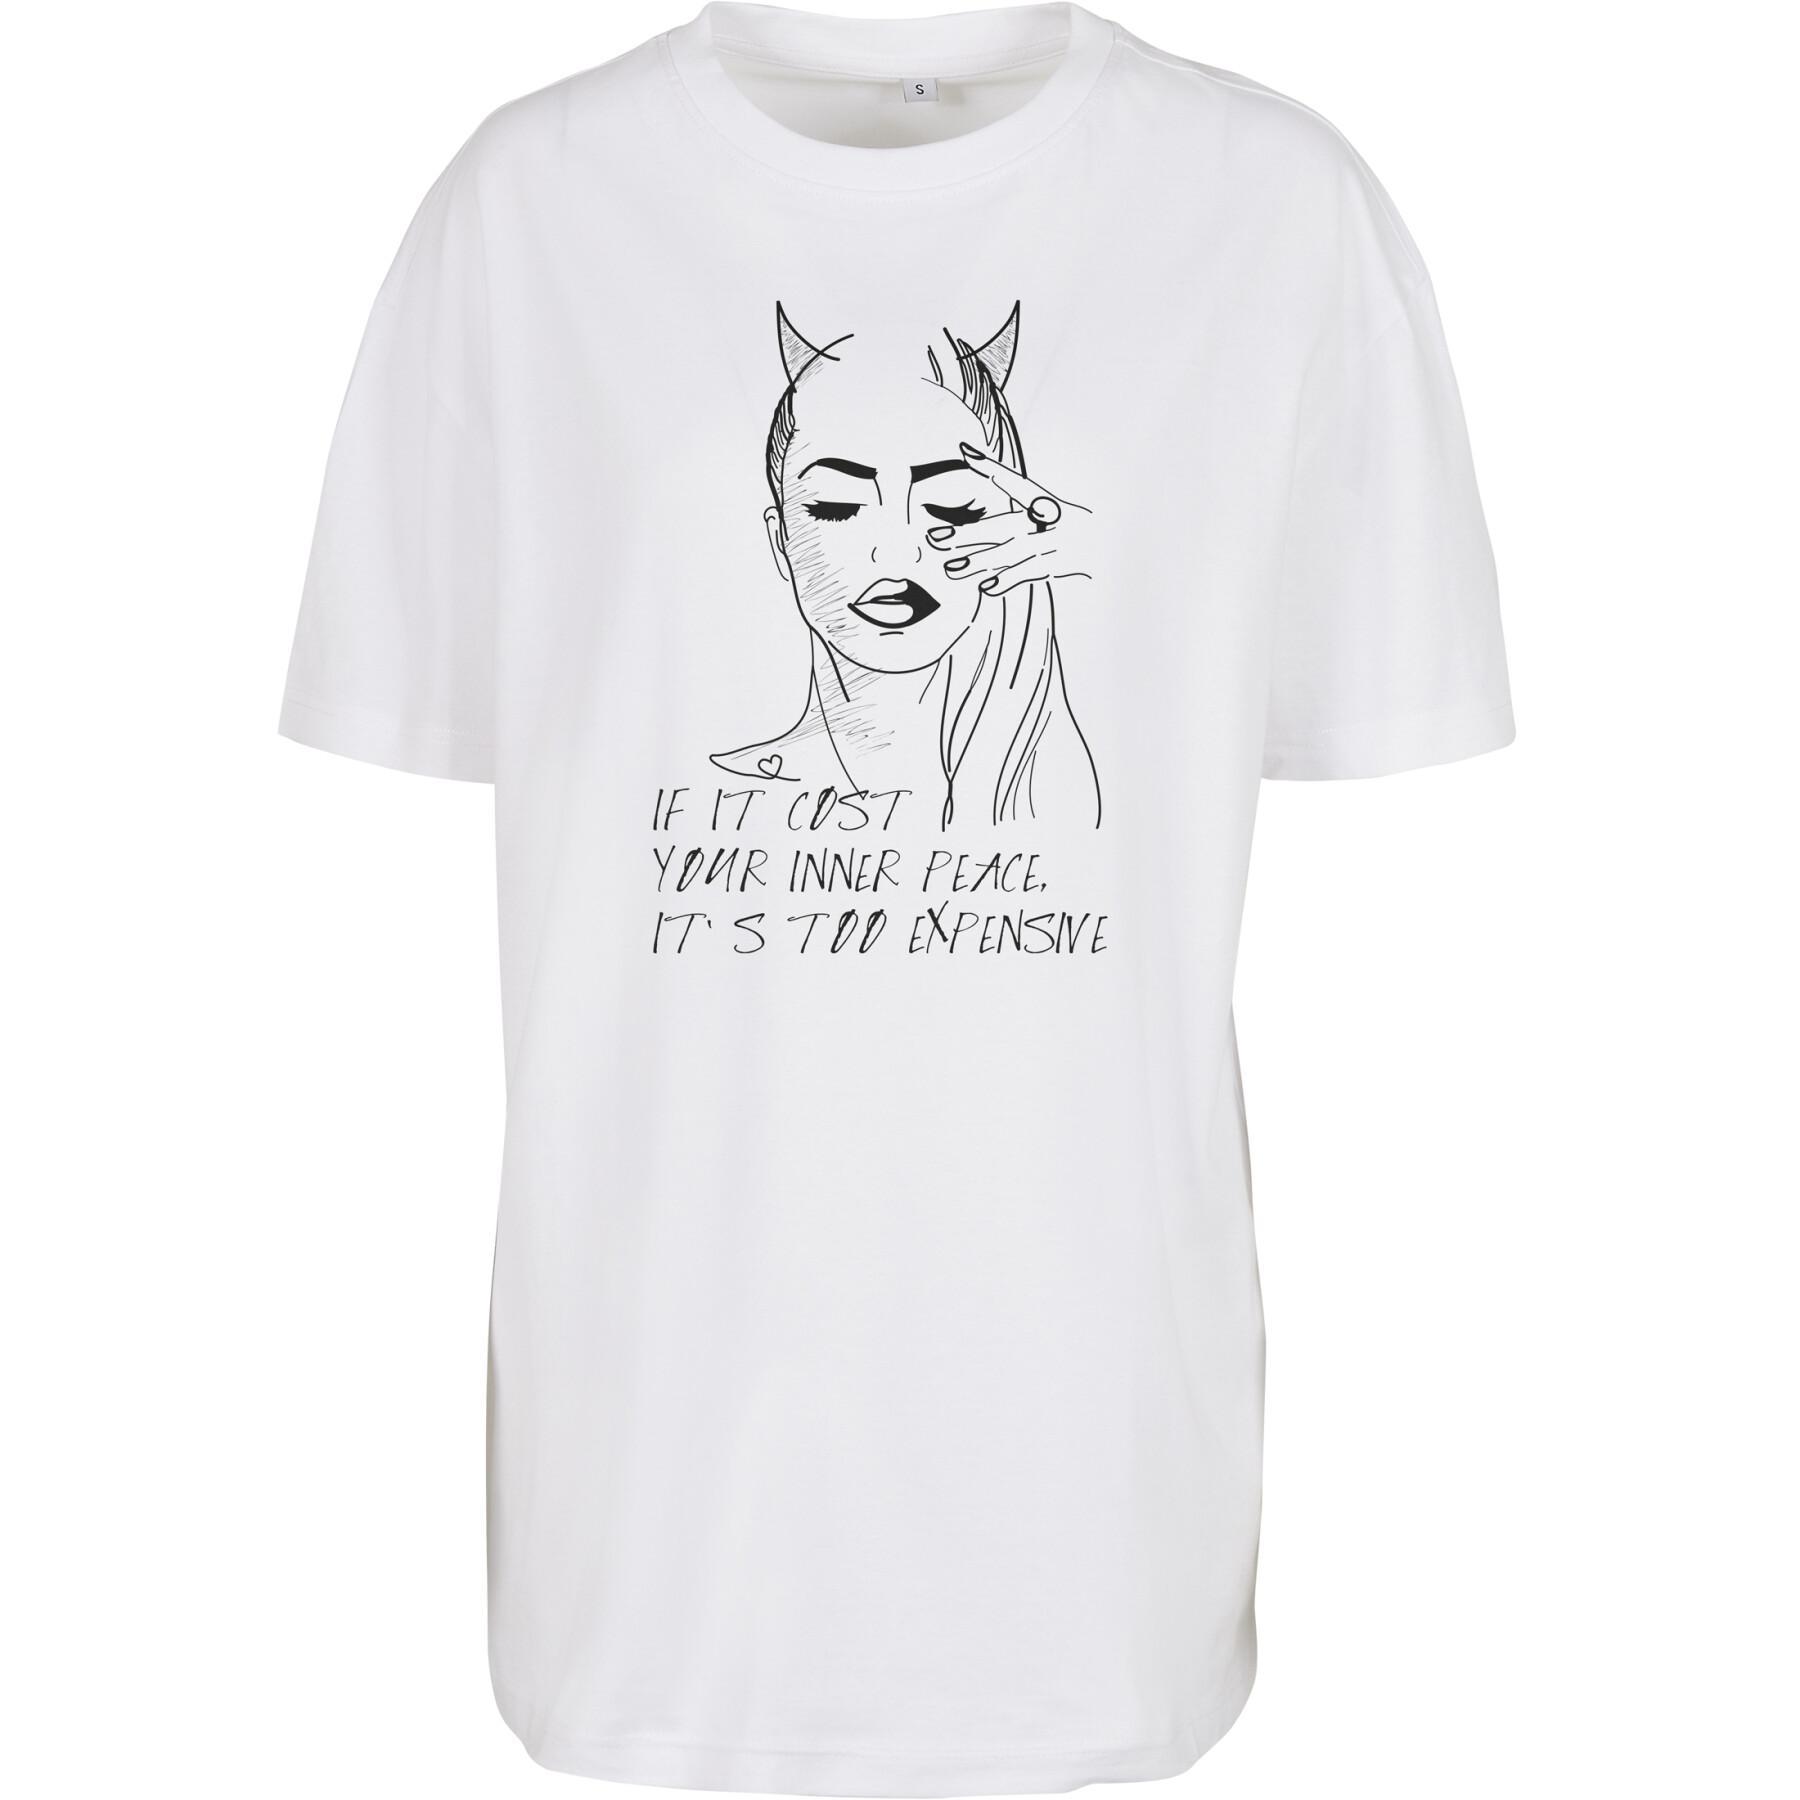 Dames-T-shirt Mister Tee ladies inner peace sign